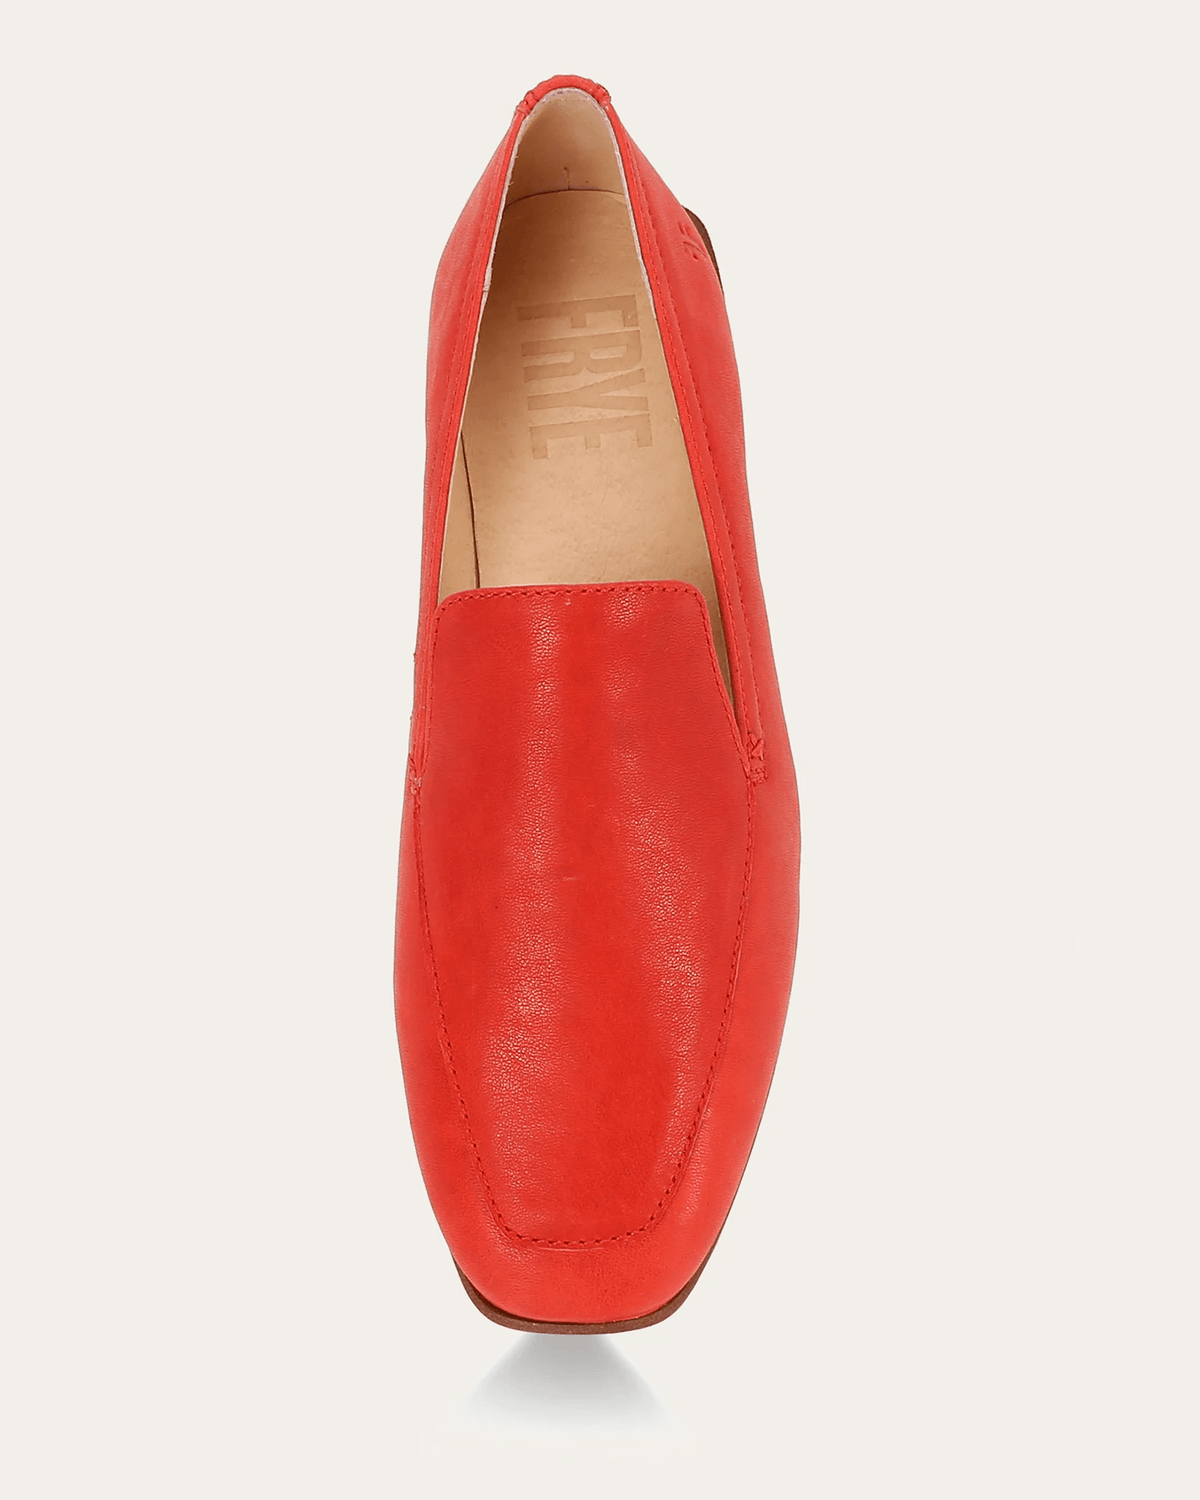 FRYE Shoes Claire Venetian in Red